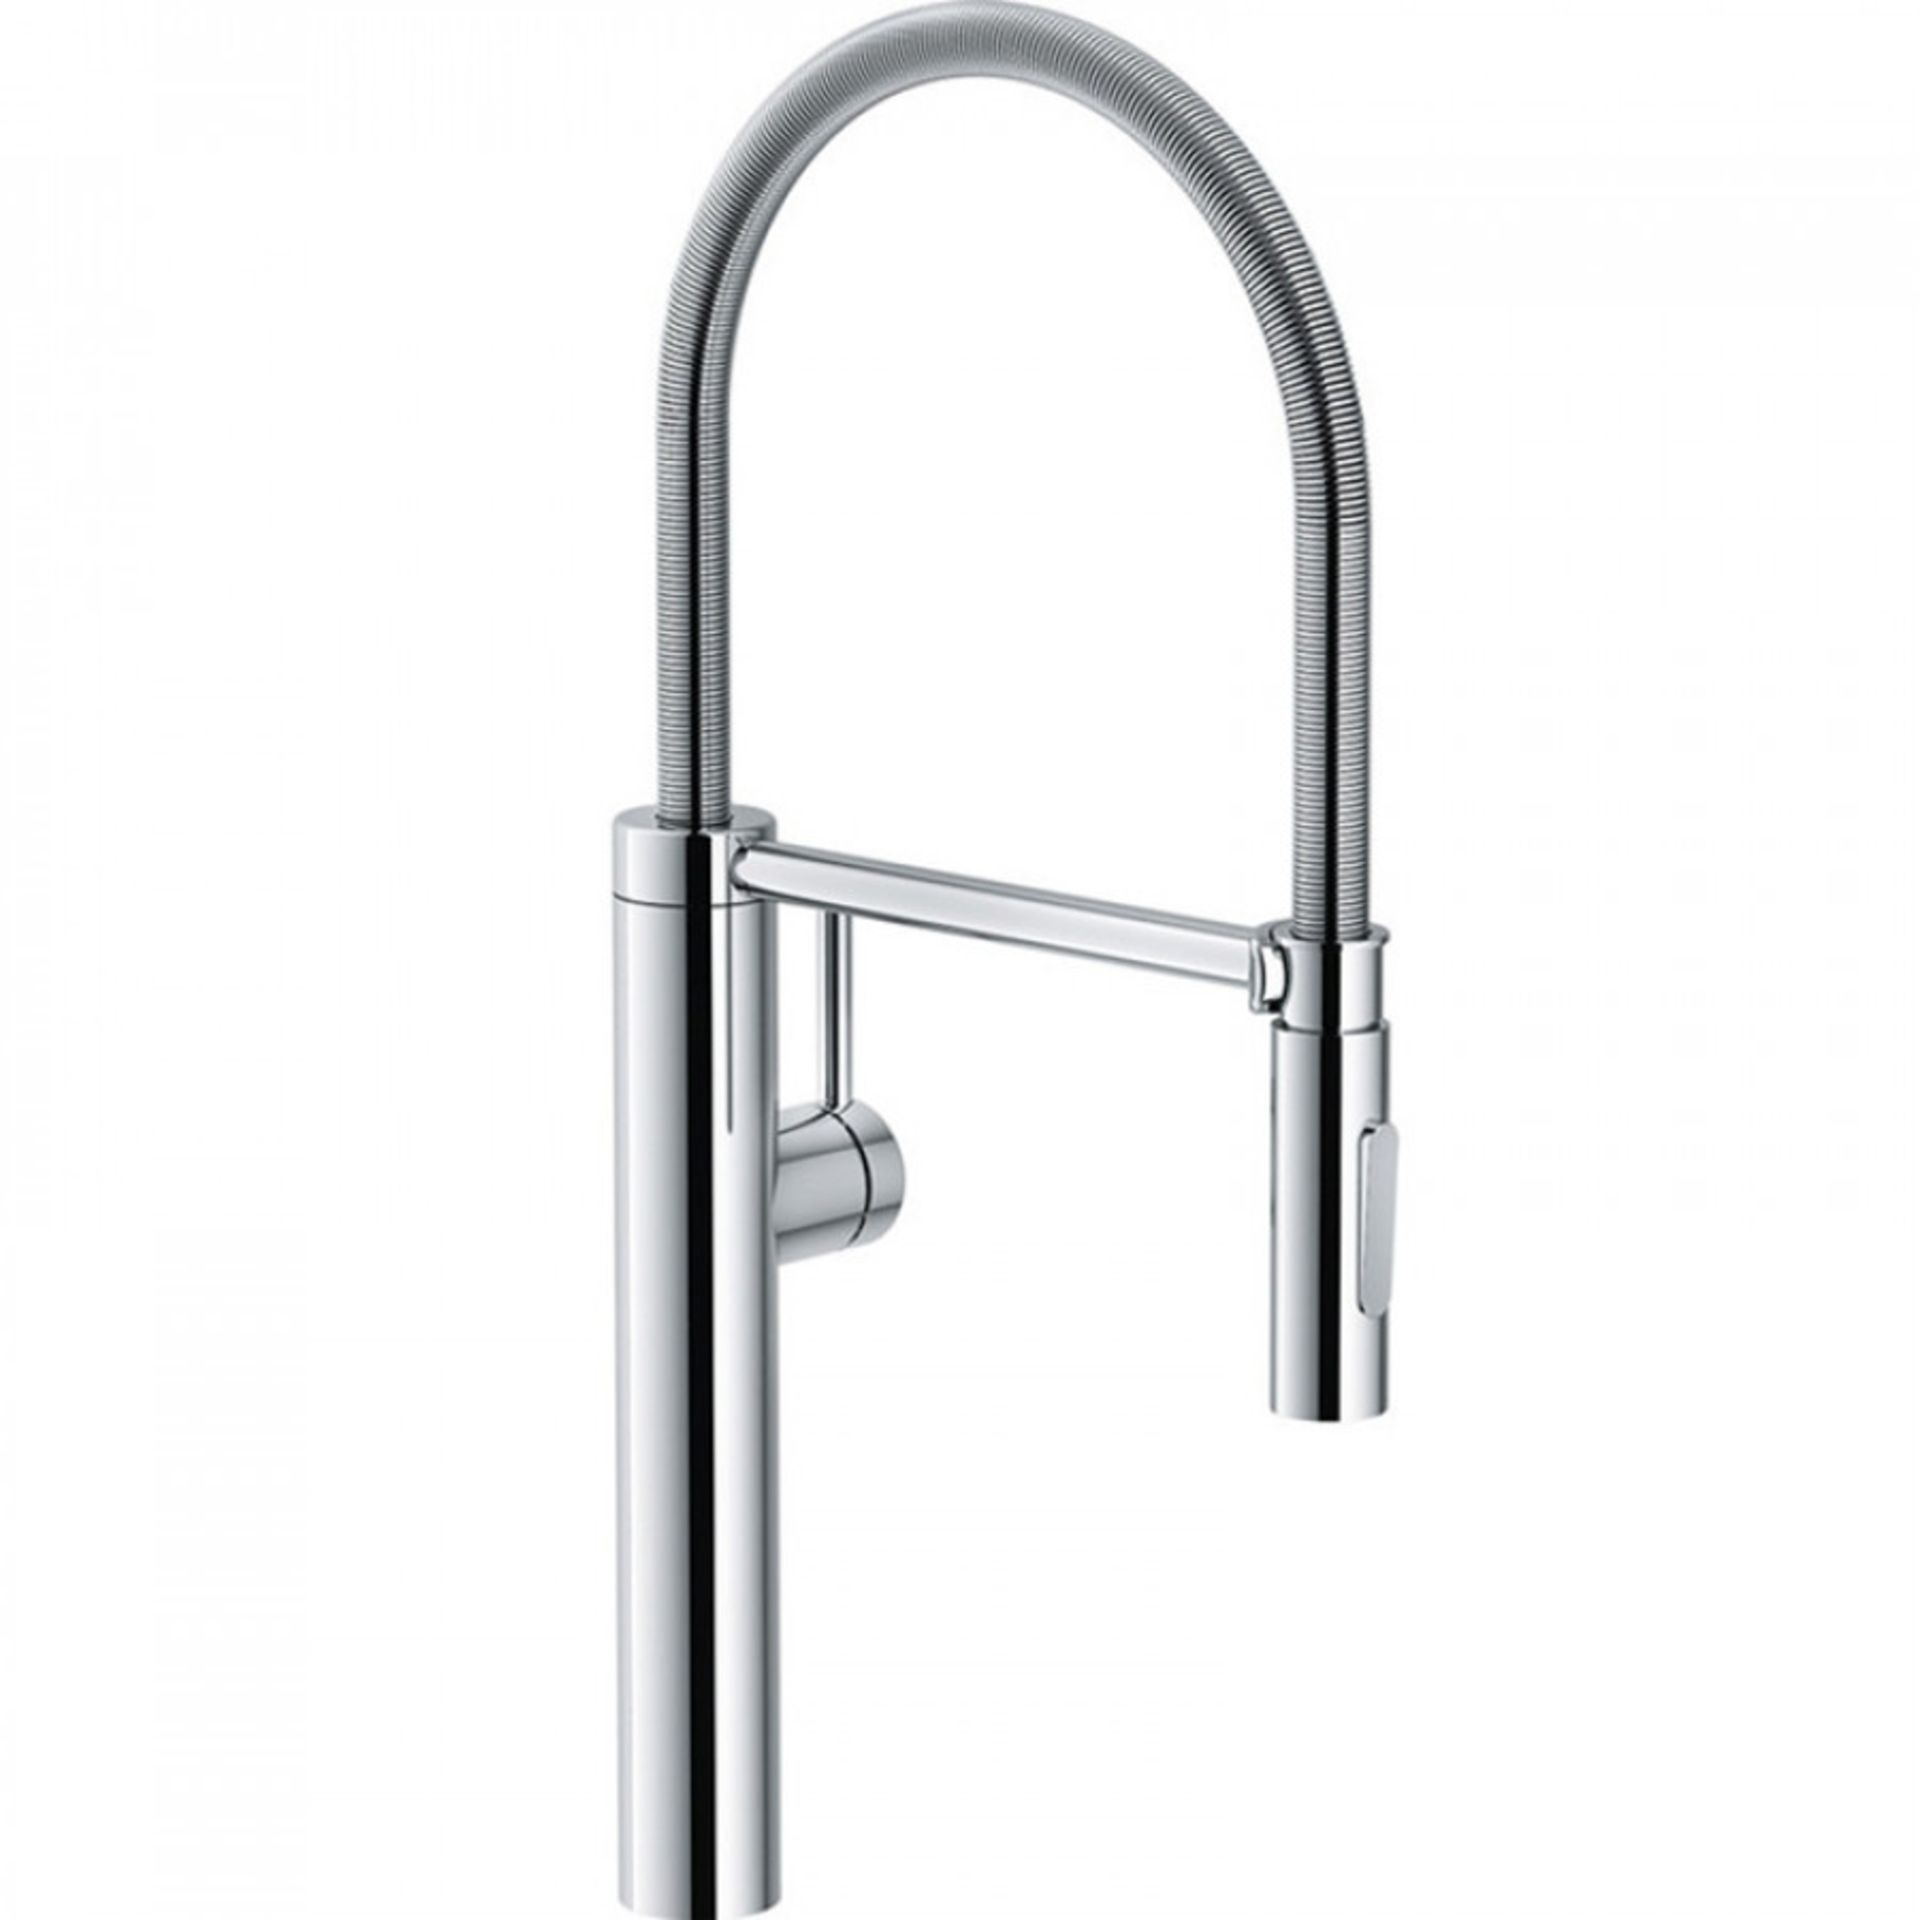 NEW (NS37) FRANKE PESCARA SEMI-PRO XL MIXER TAP CHROM. RRP £332.99. Overall Height (mm): 550 ...